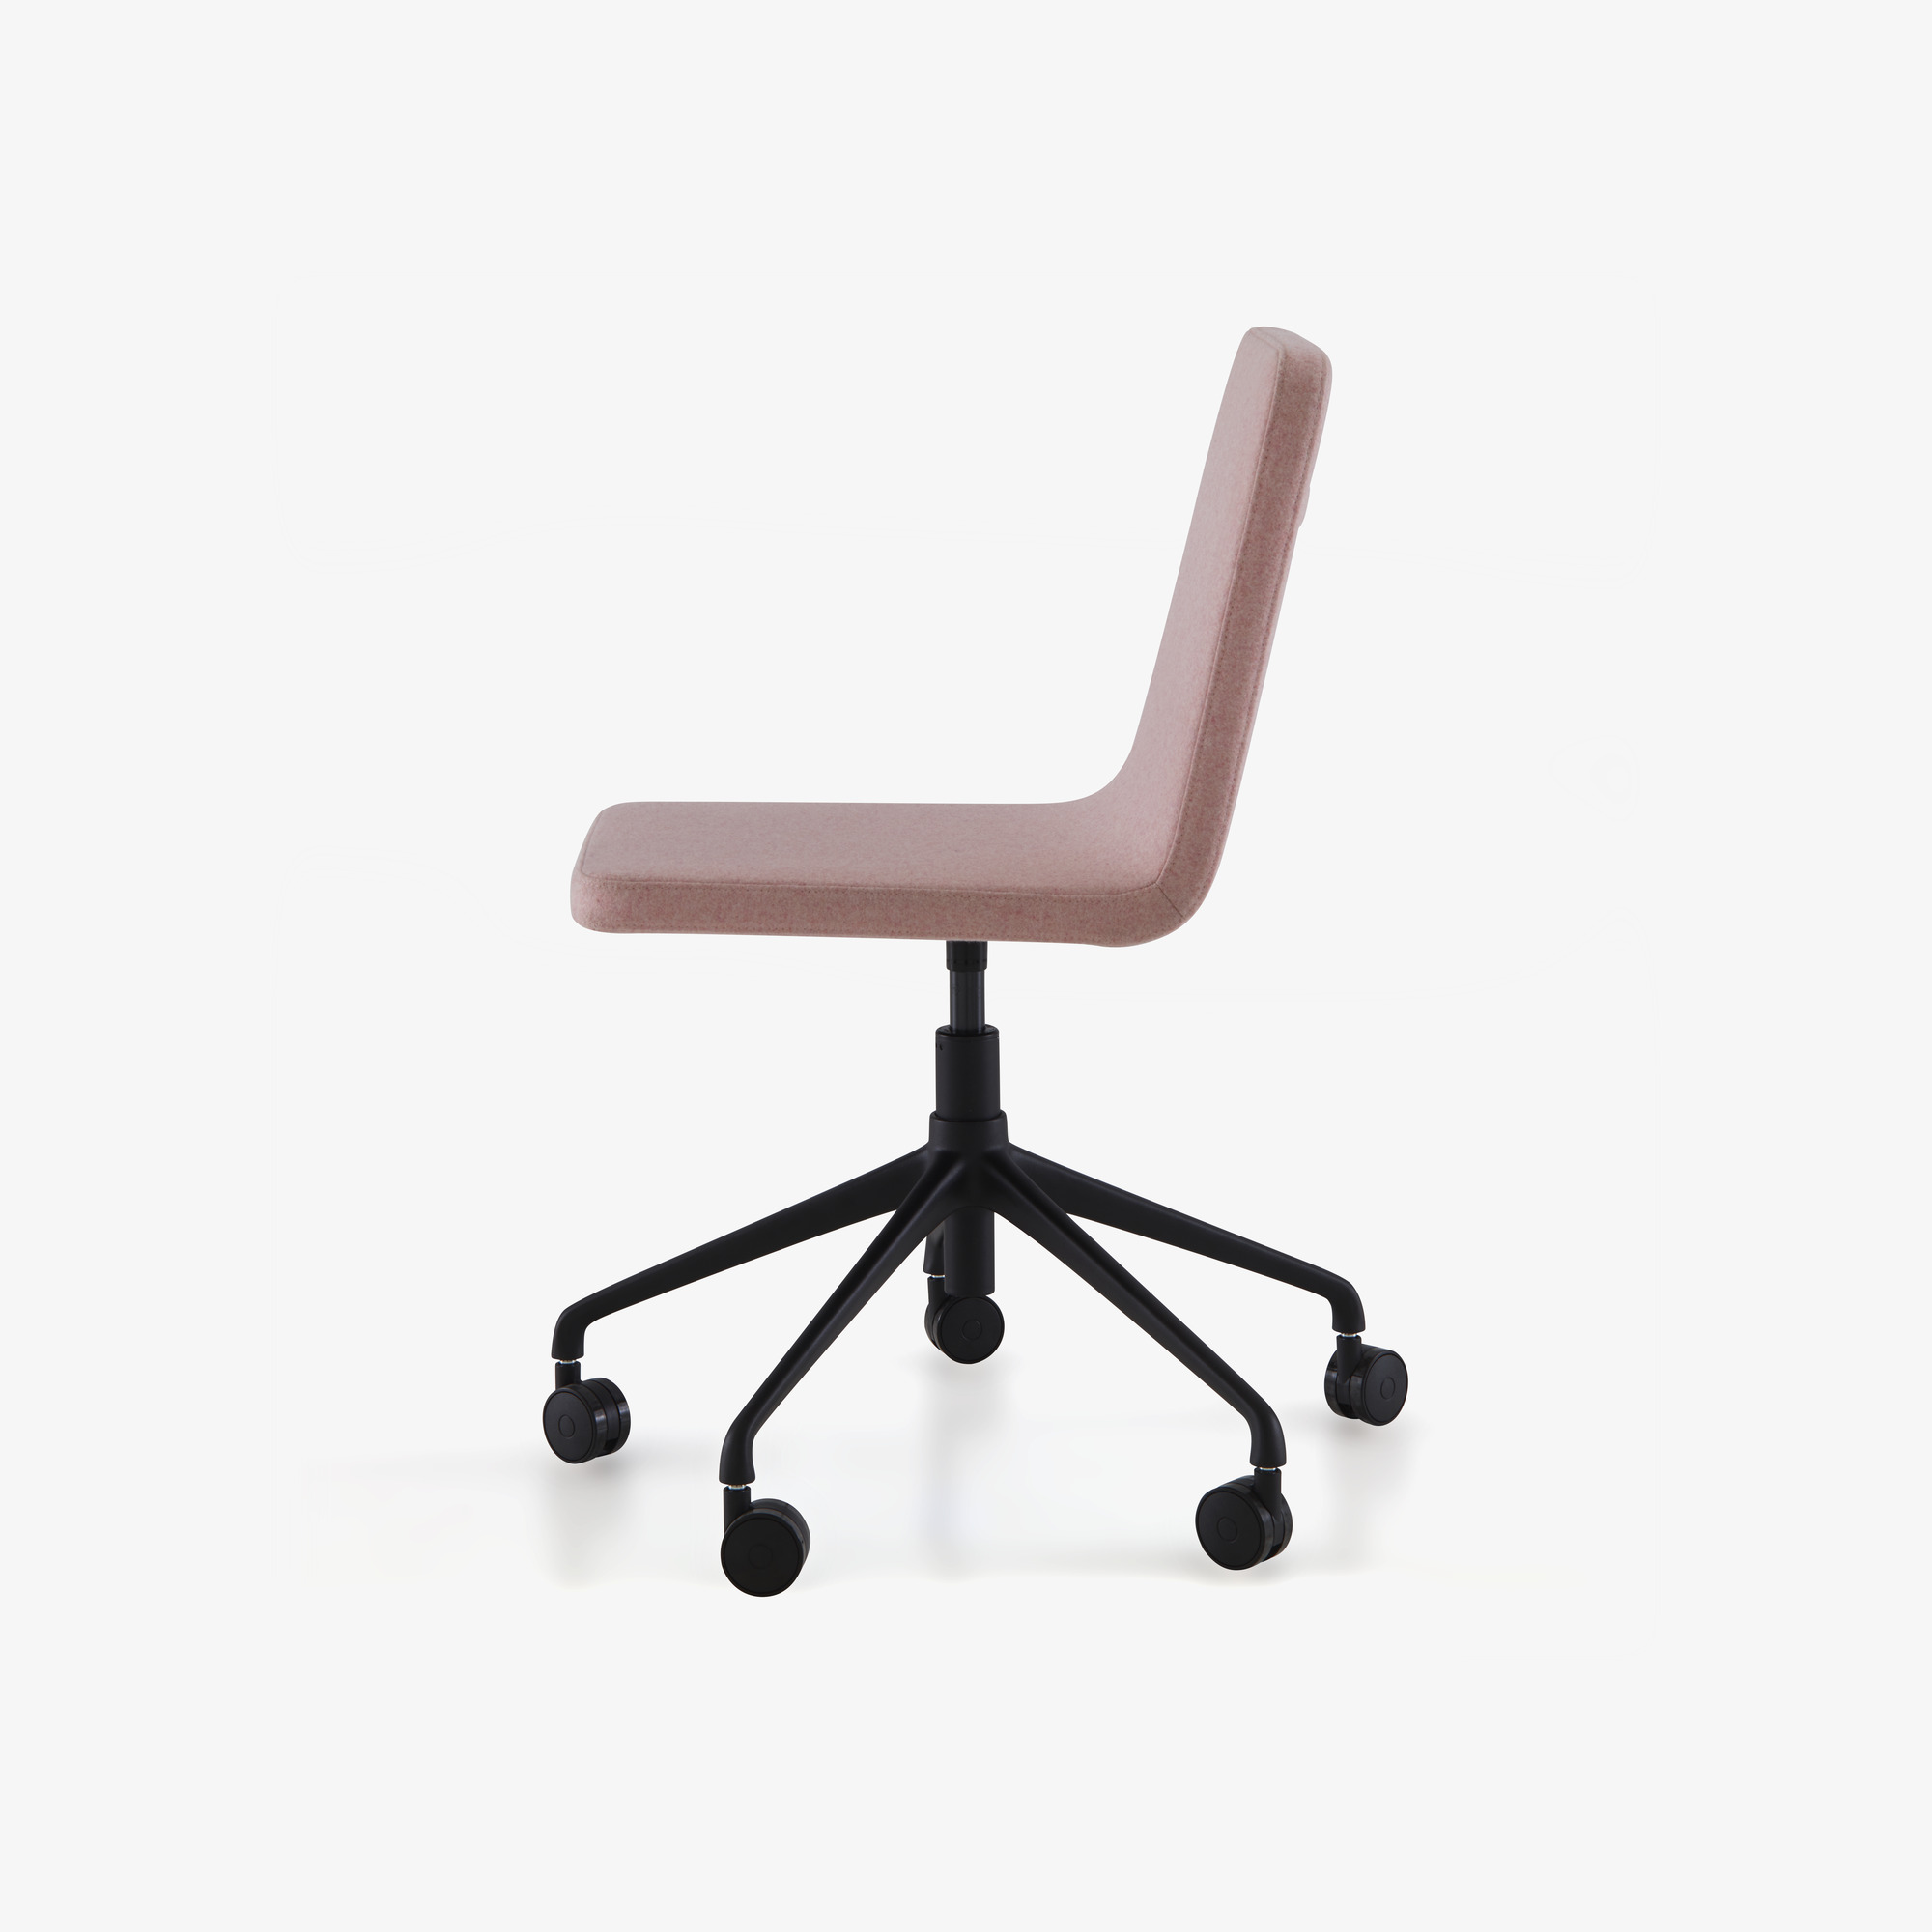 Image Desk chair set of feet with wheels 2